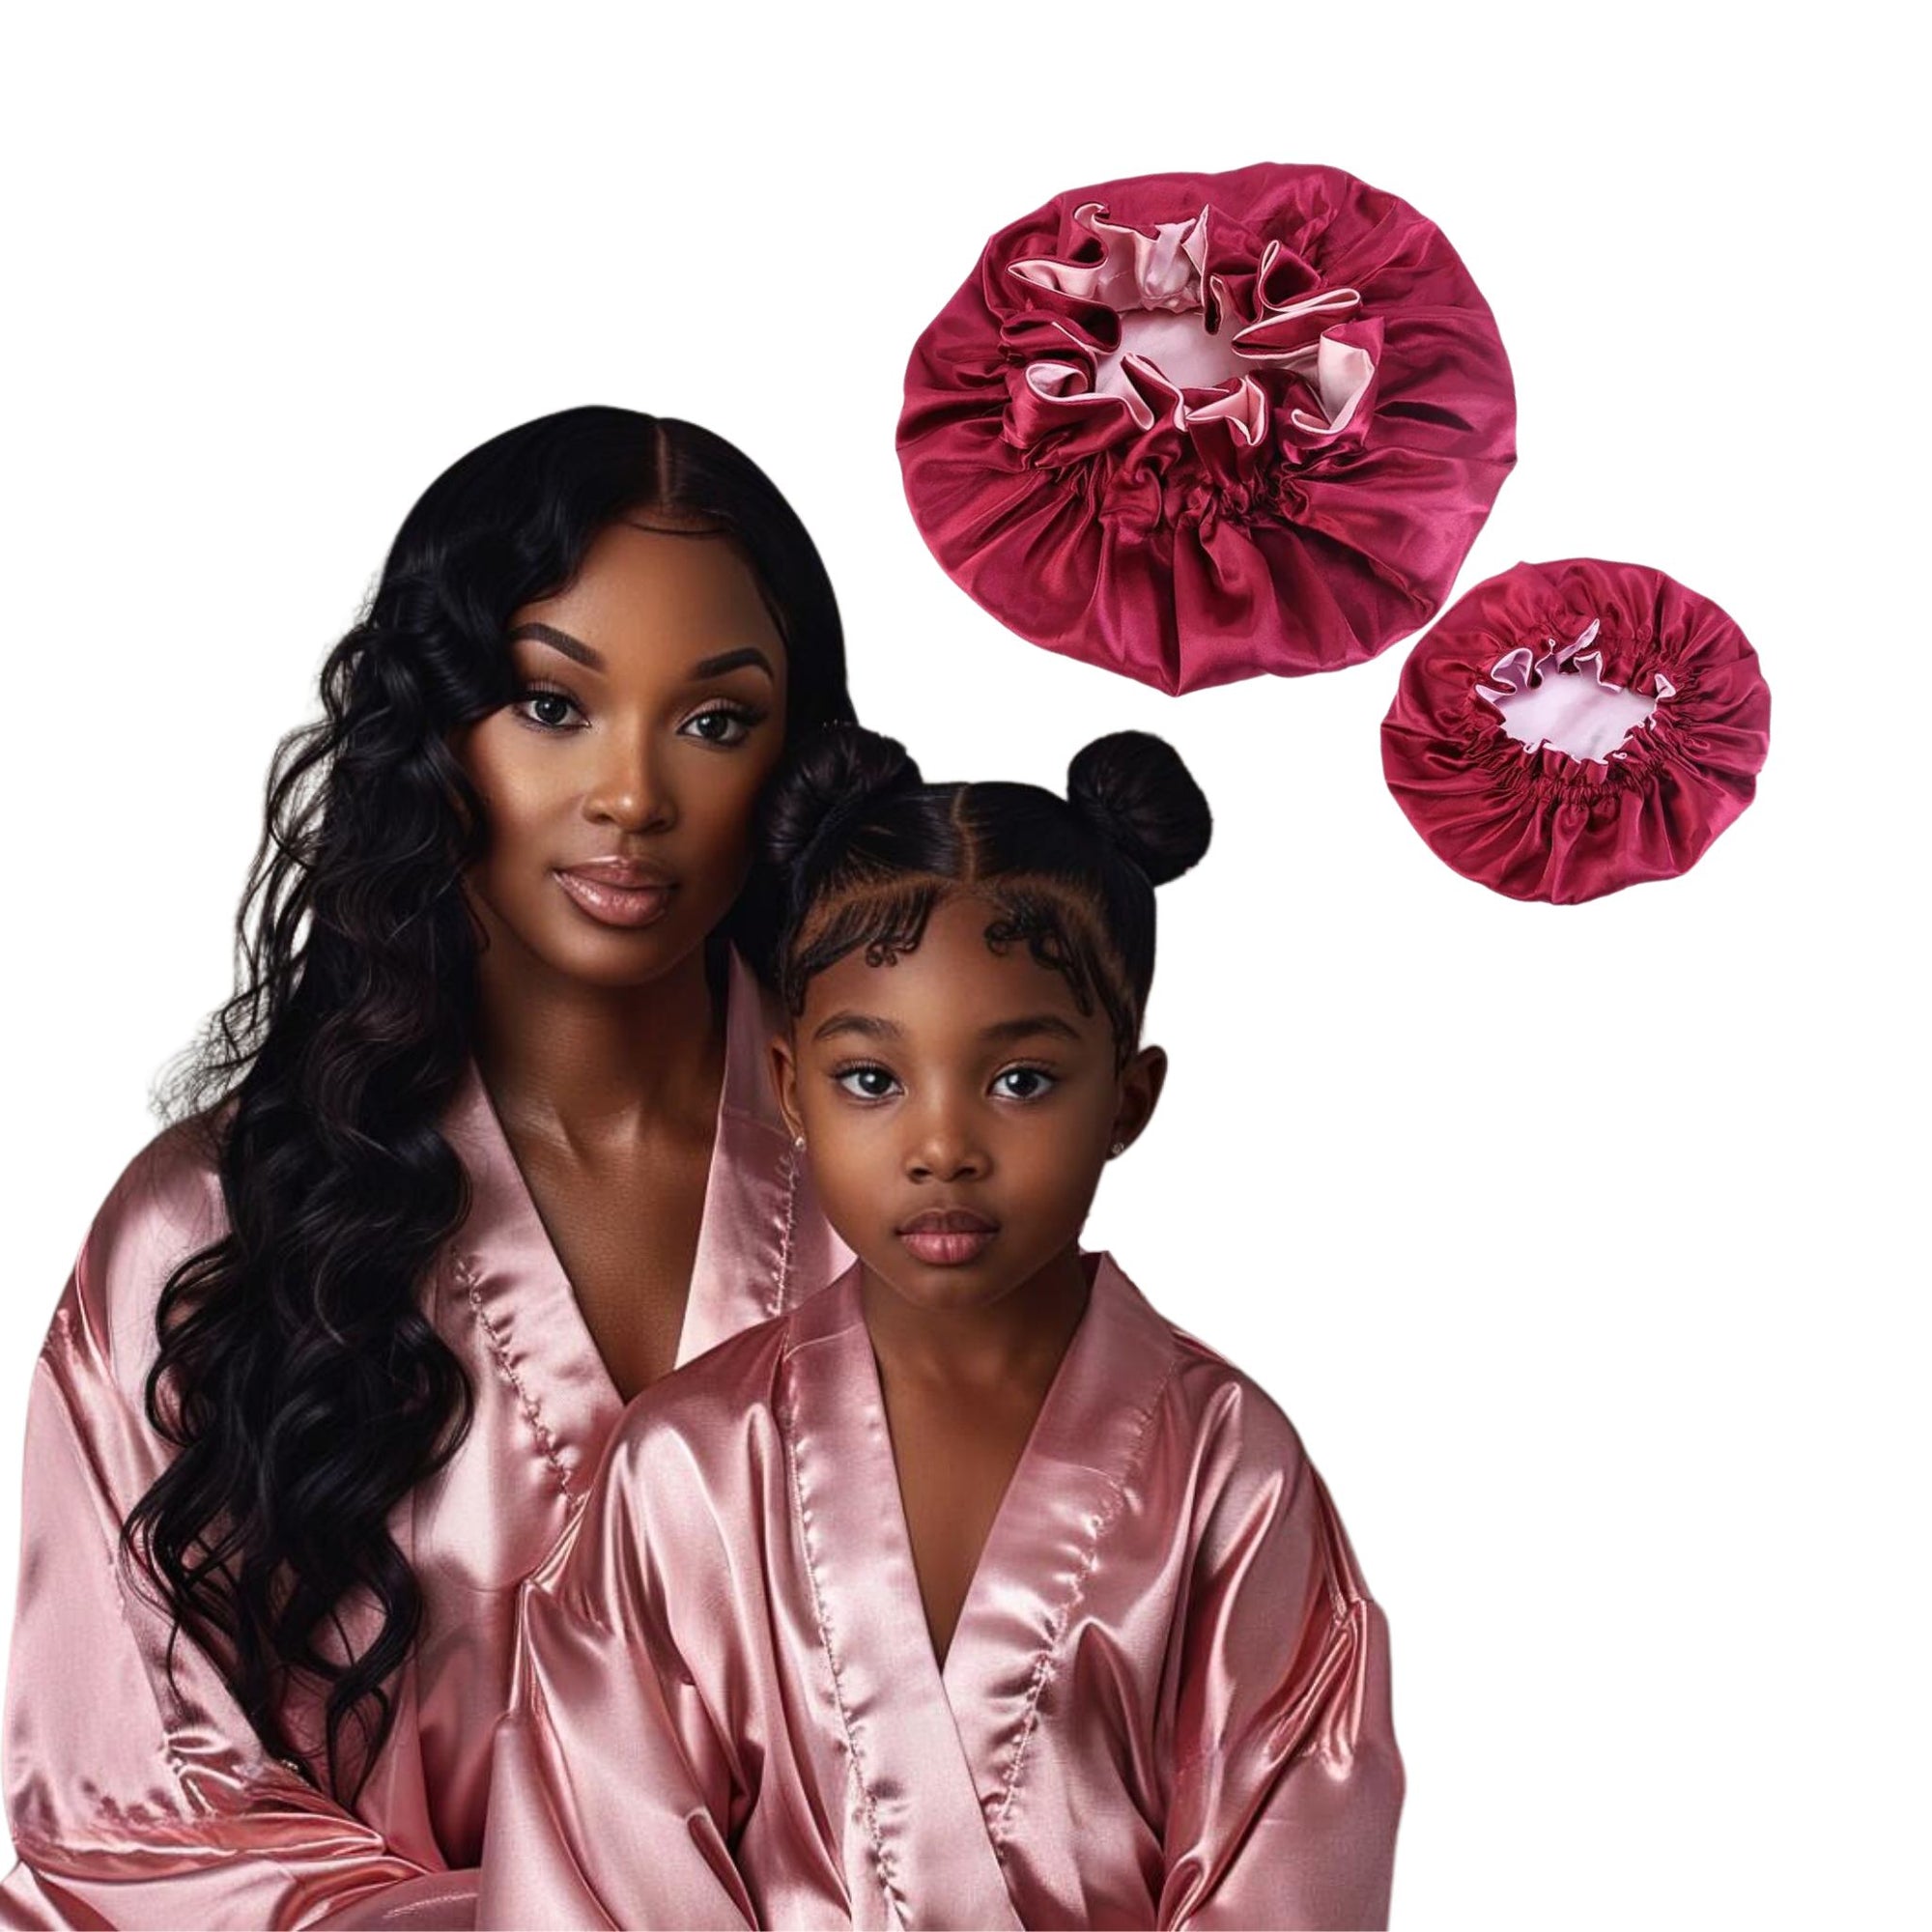 Mommy and me Pink Silky Satin Robes and matching Bonnets  | Mother daughter spa robes matching bonnets